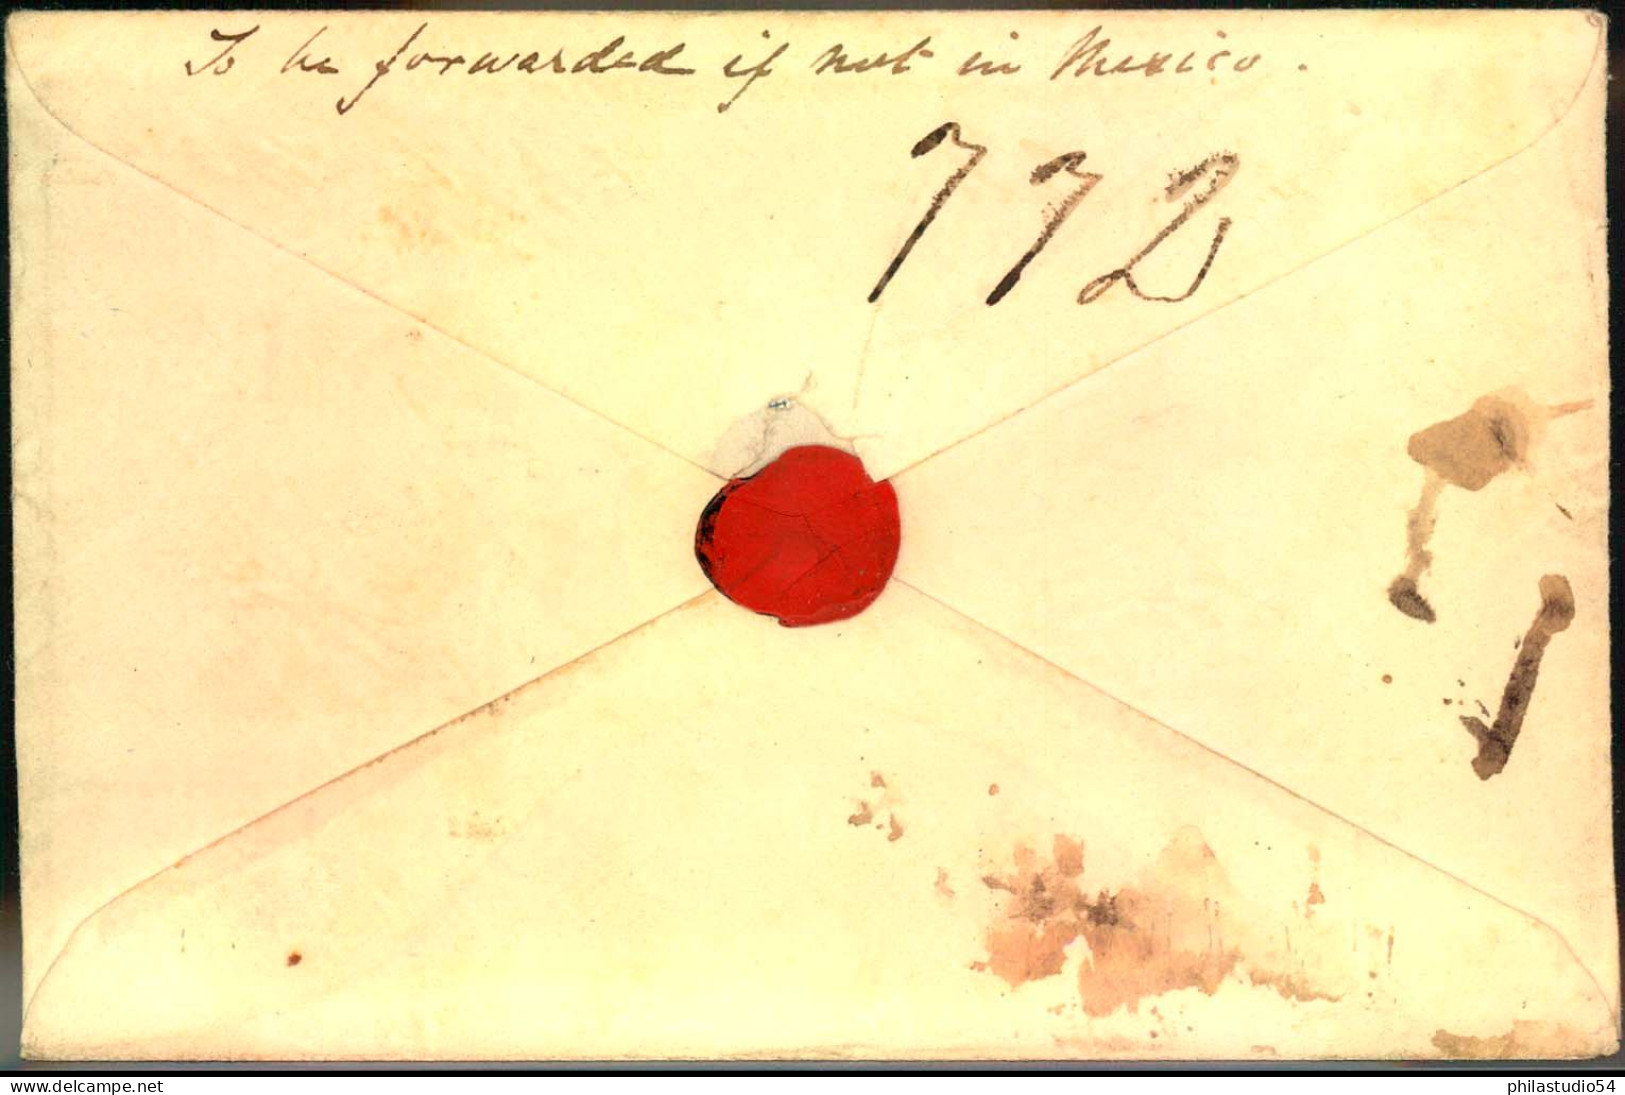 1851, Envelope From "Sussex Place" With Handwritten "West India Mail" To VERA CRUZ, Mexico. Transit PAID DC APR 16 1851. - Covers & Documents